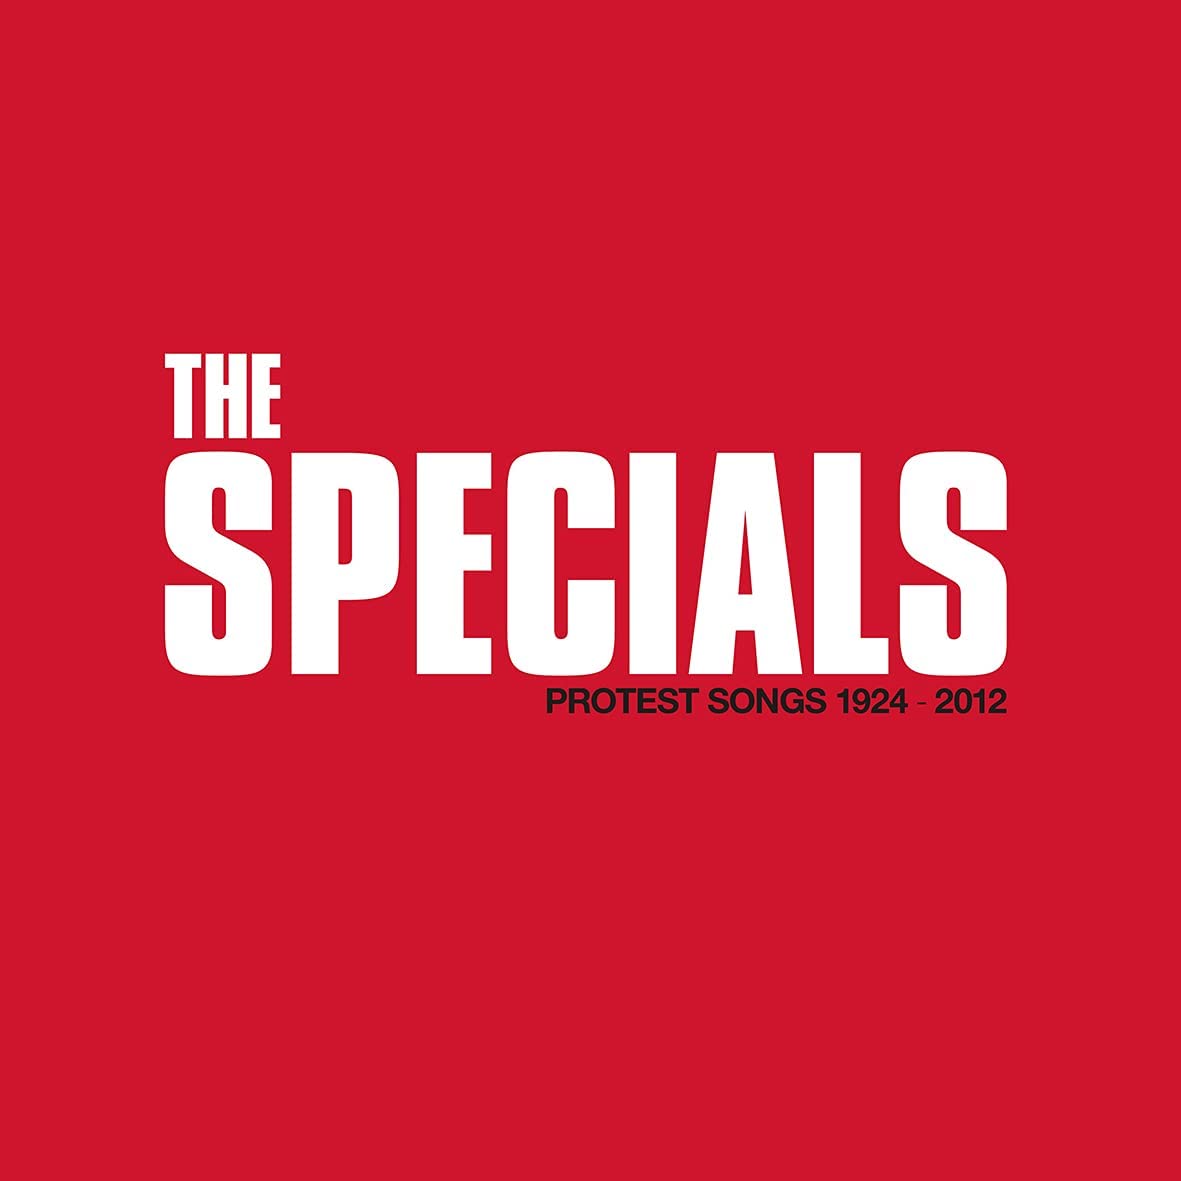 CD - The Specials - Protest Songs 1924-2012